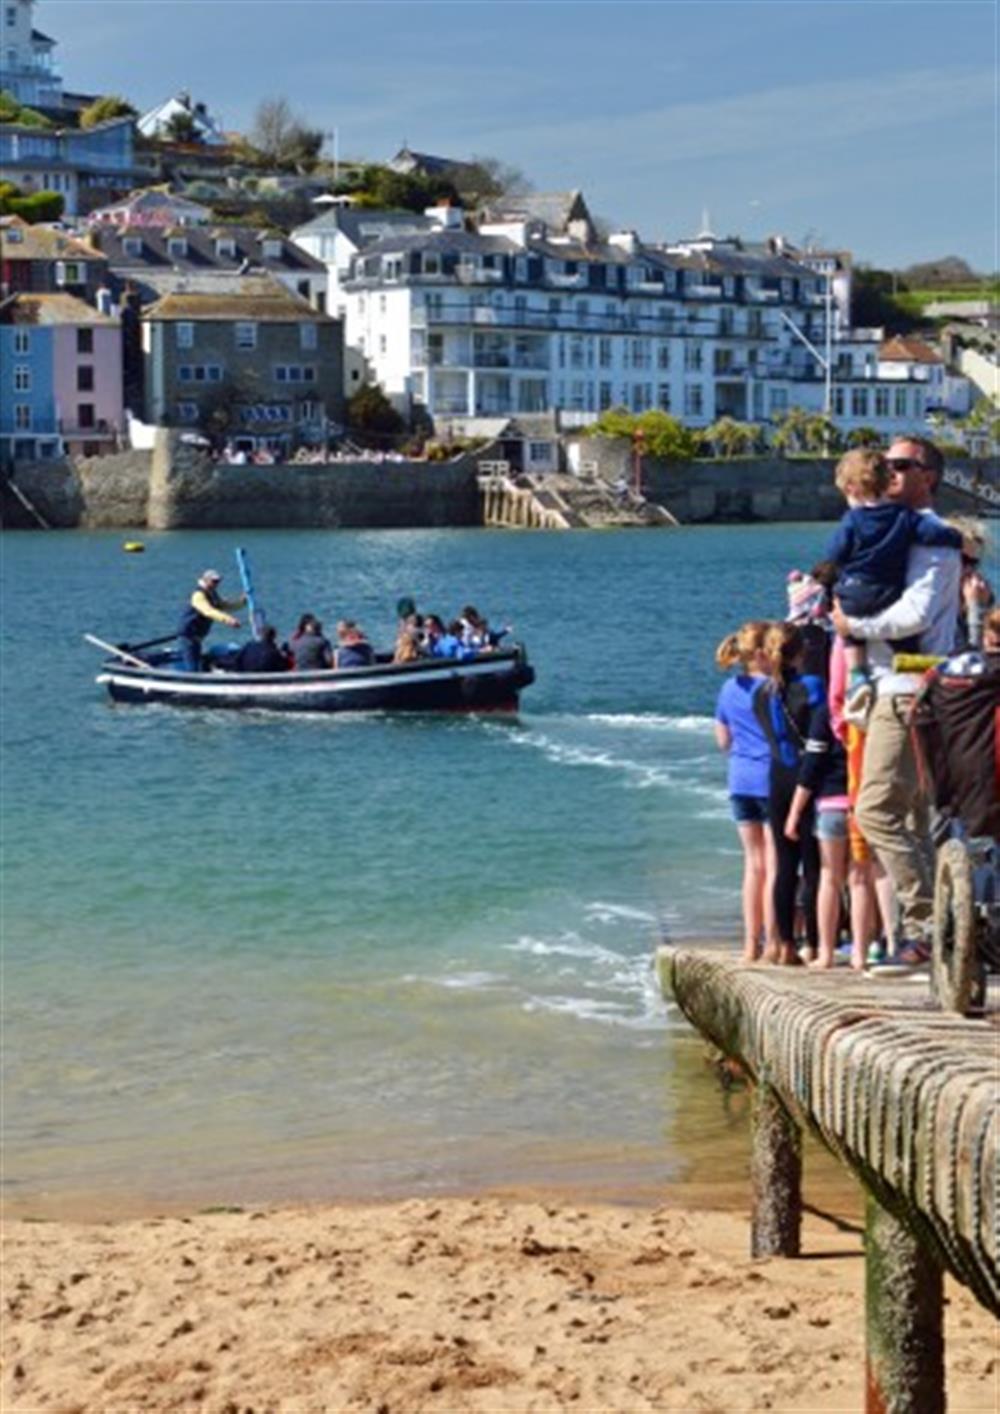 The Salcombe to East Portlemouth ferry is a fun way to visit the popular town of Salcombe. at Owlacombe Cottage in Slapton